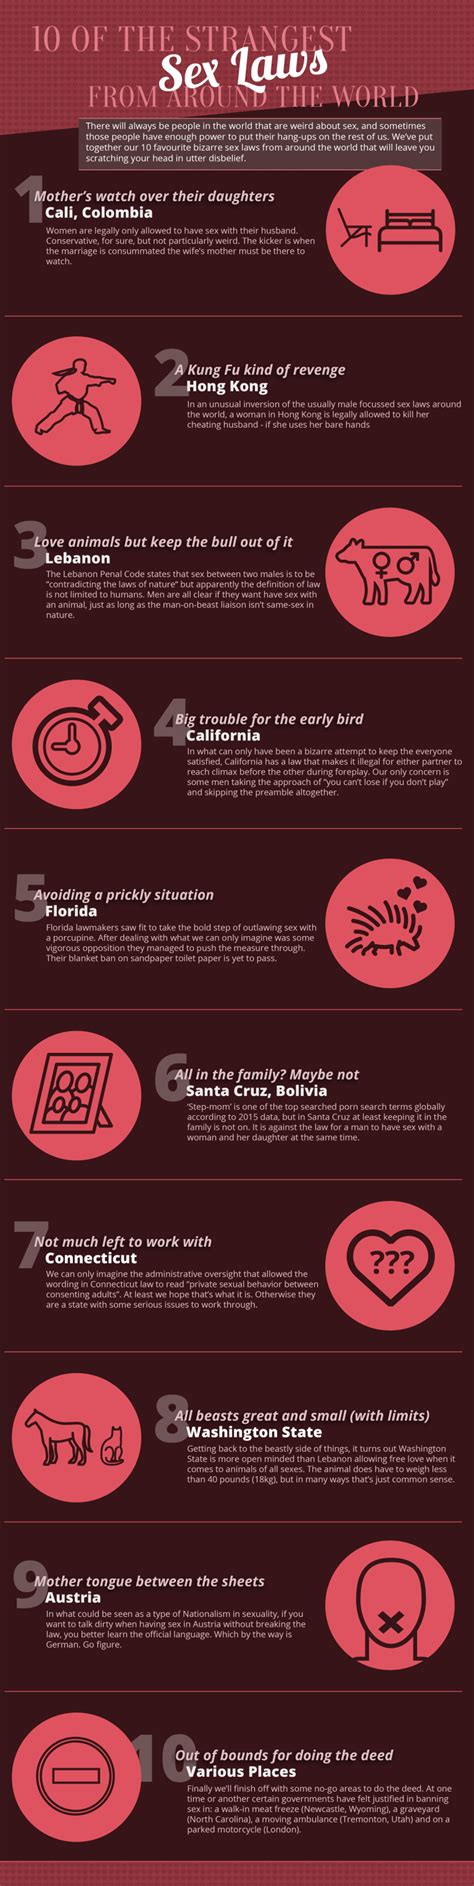 10 Bizarre Sex Laws Around The World Infographic More Foreplay